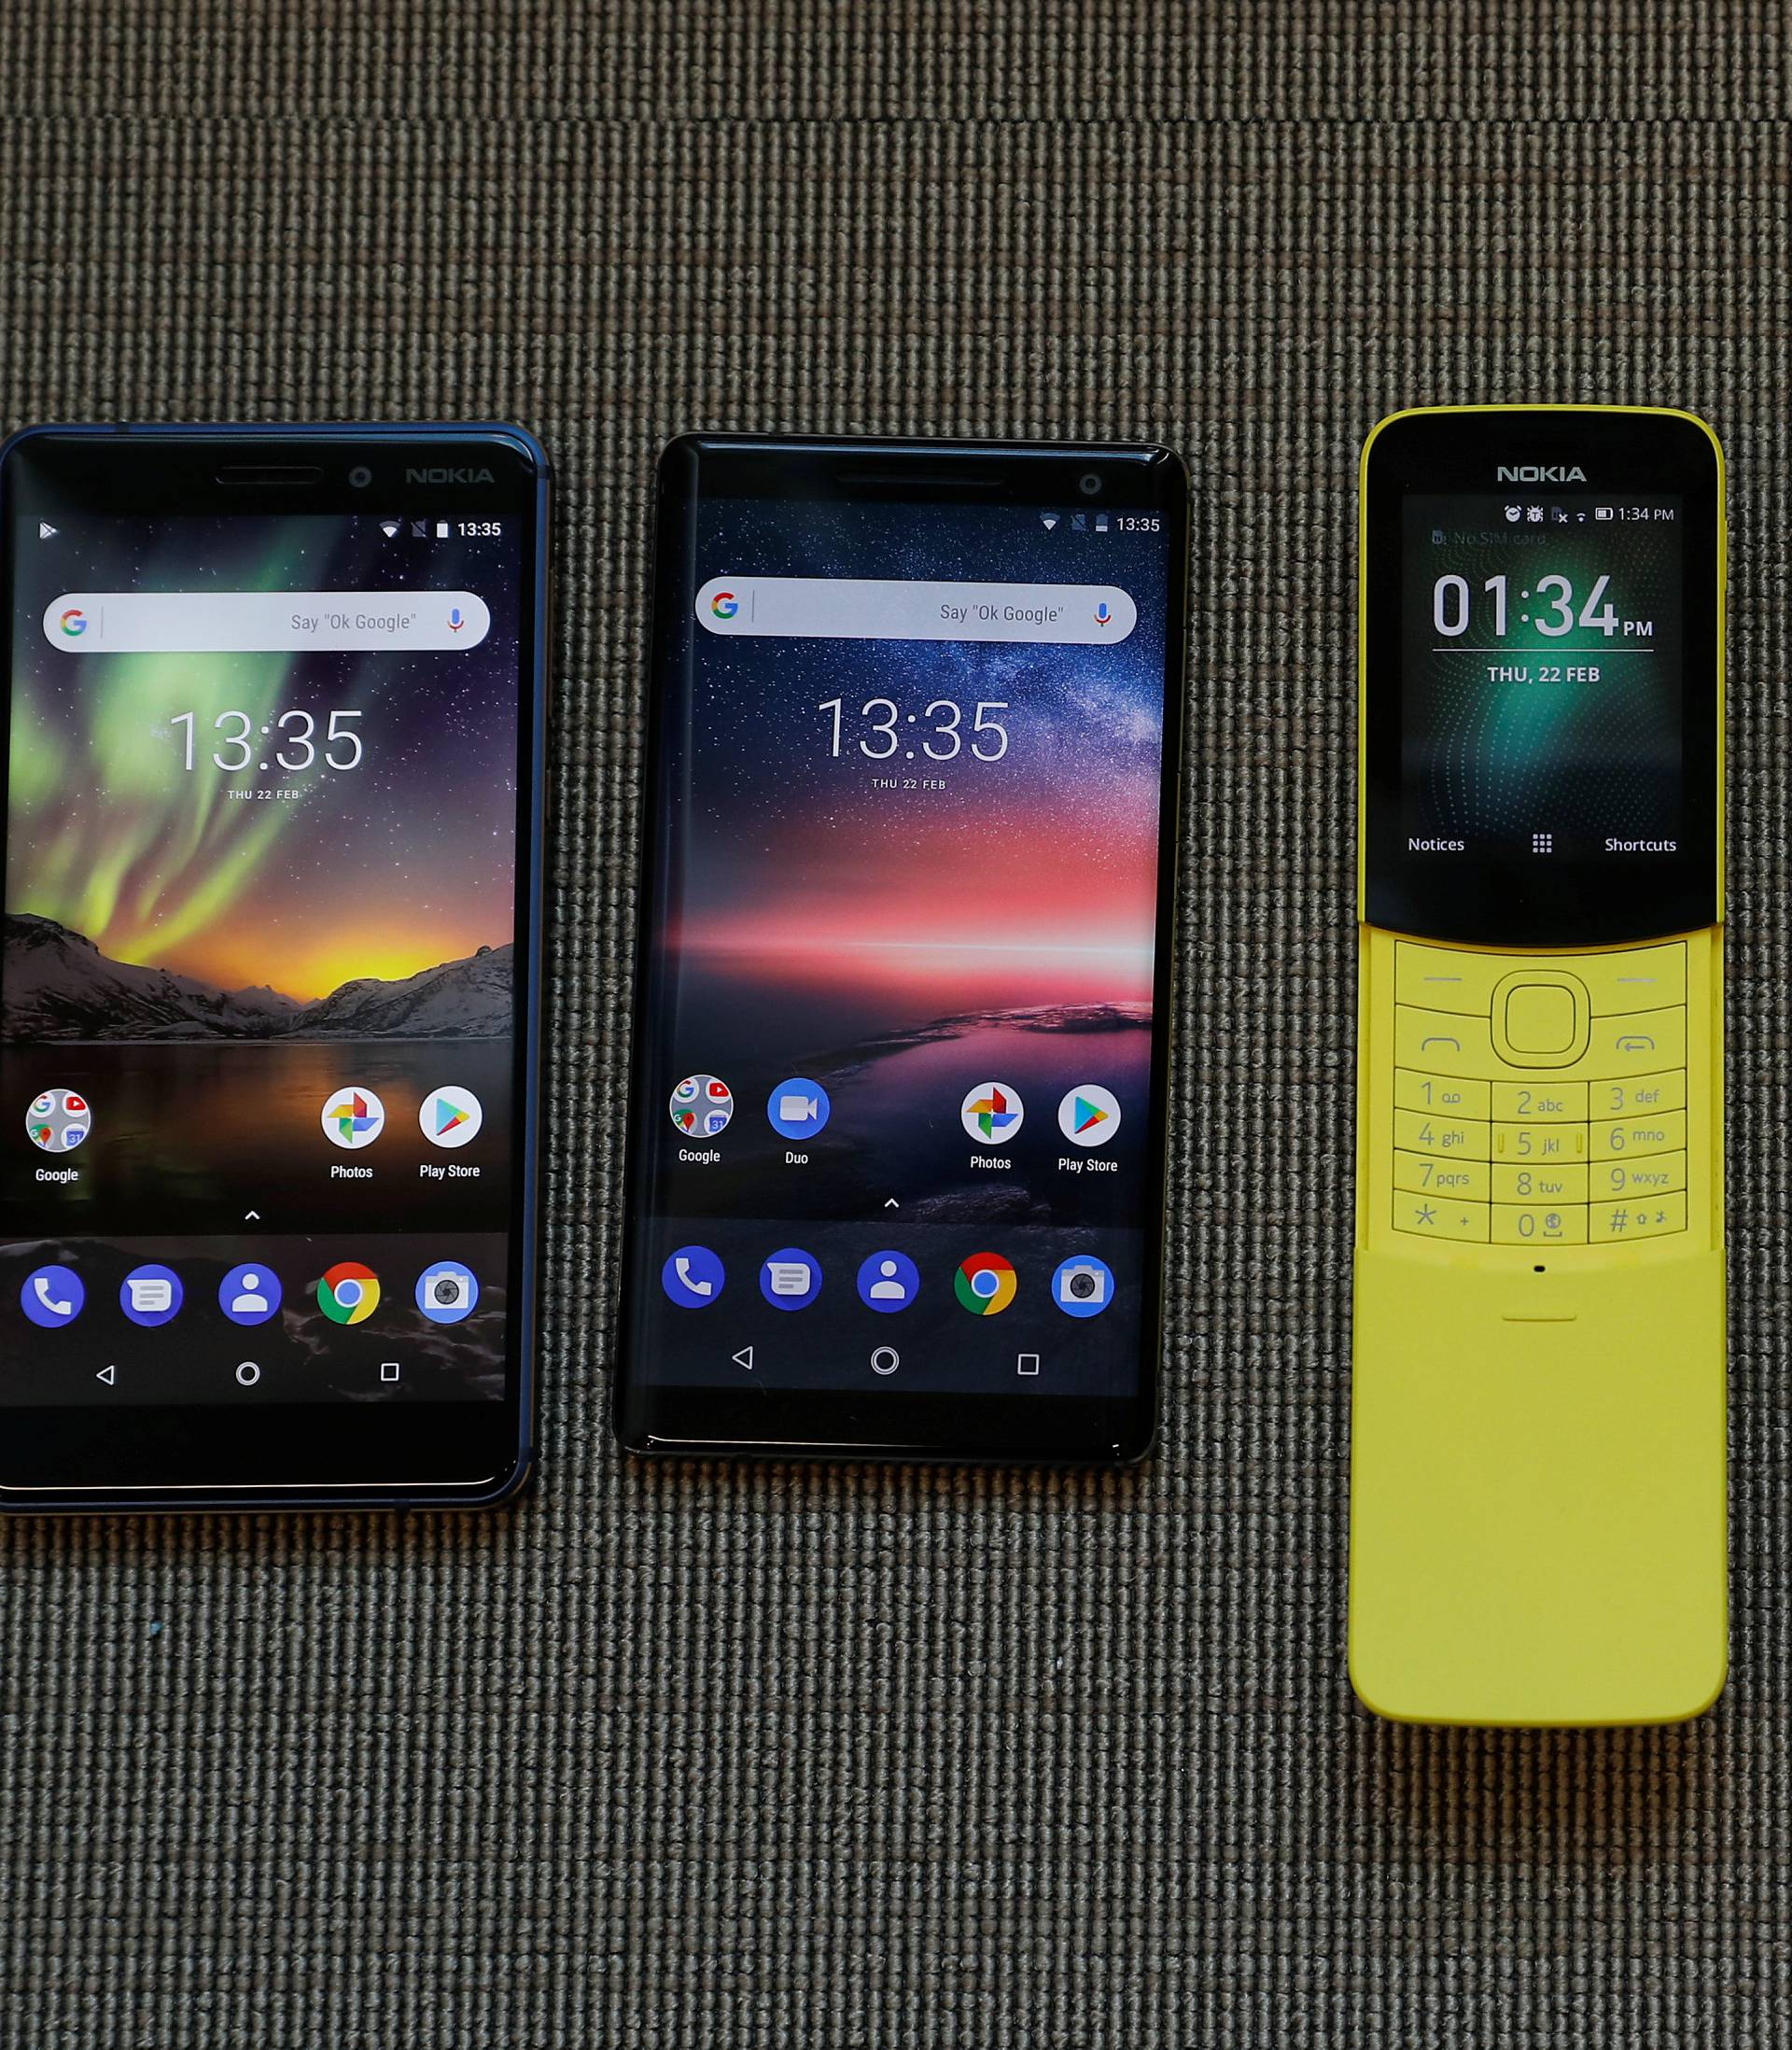 The New Nokia 6, Nokia 8 Sirocco, Nokia 8110, Nokia 1 and the Nokia 7 Plus are seen at a pre-launch event in London